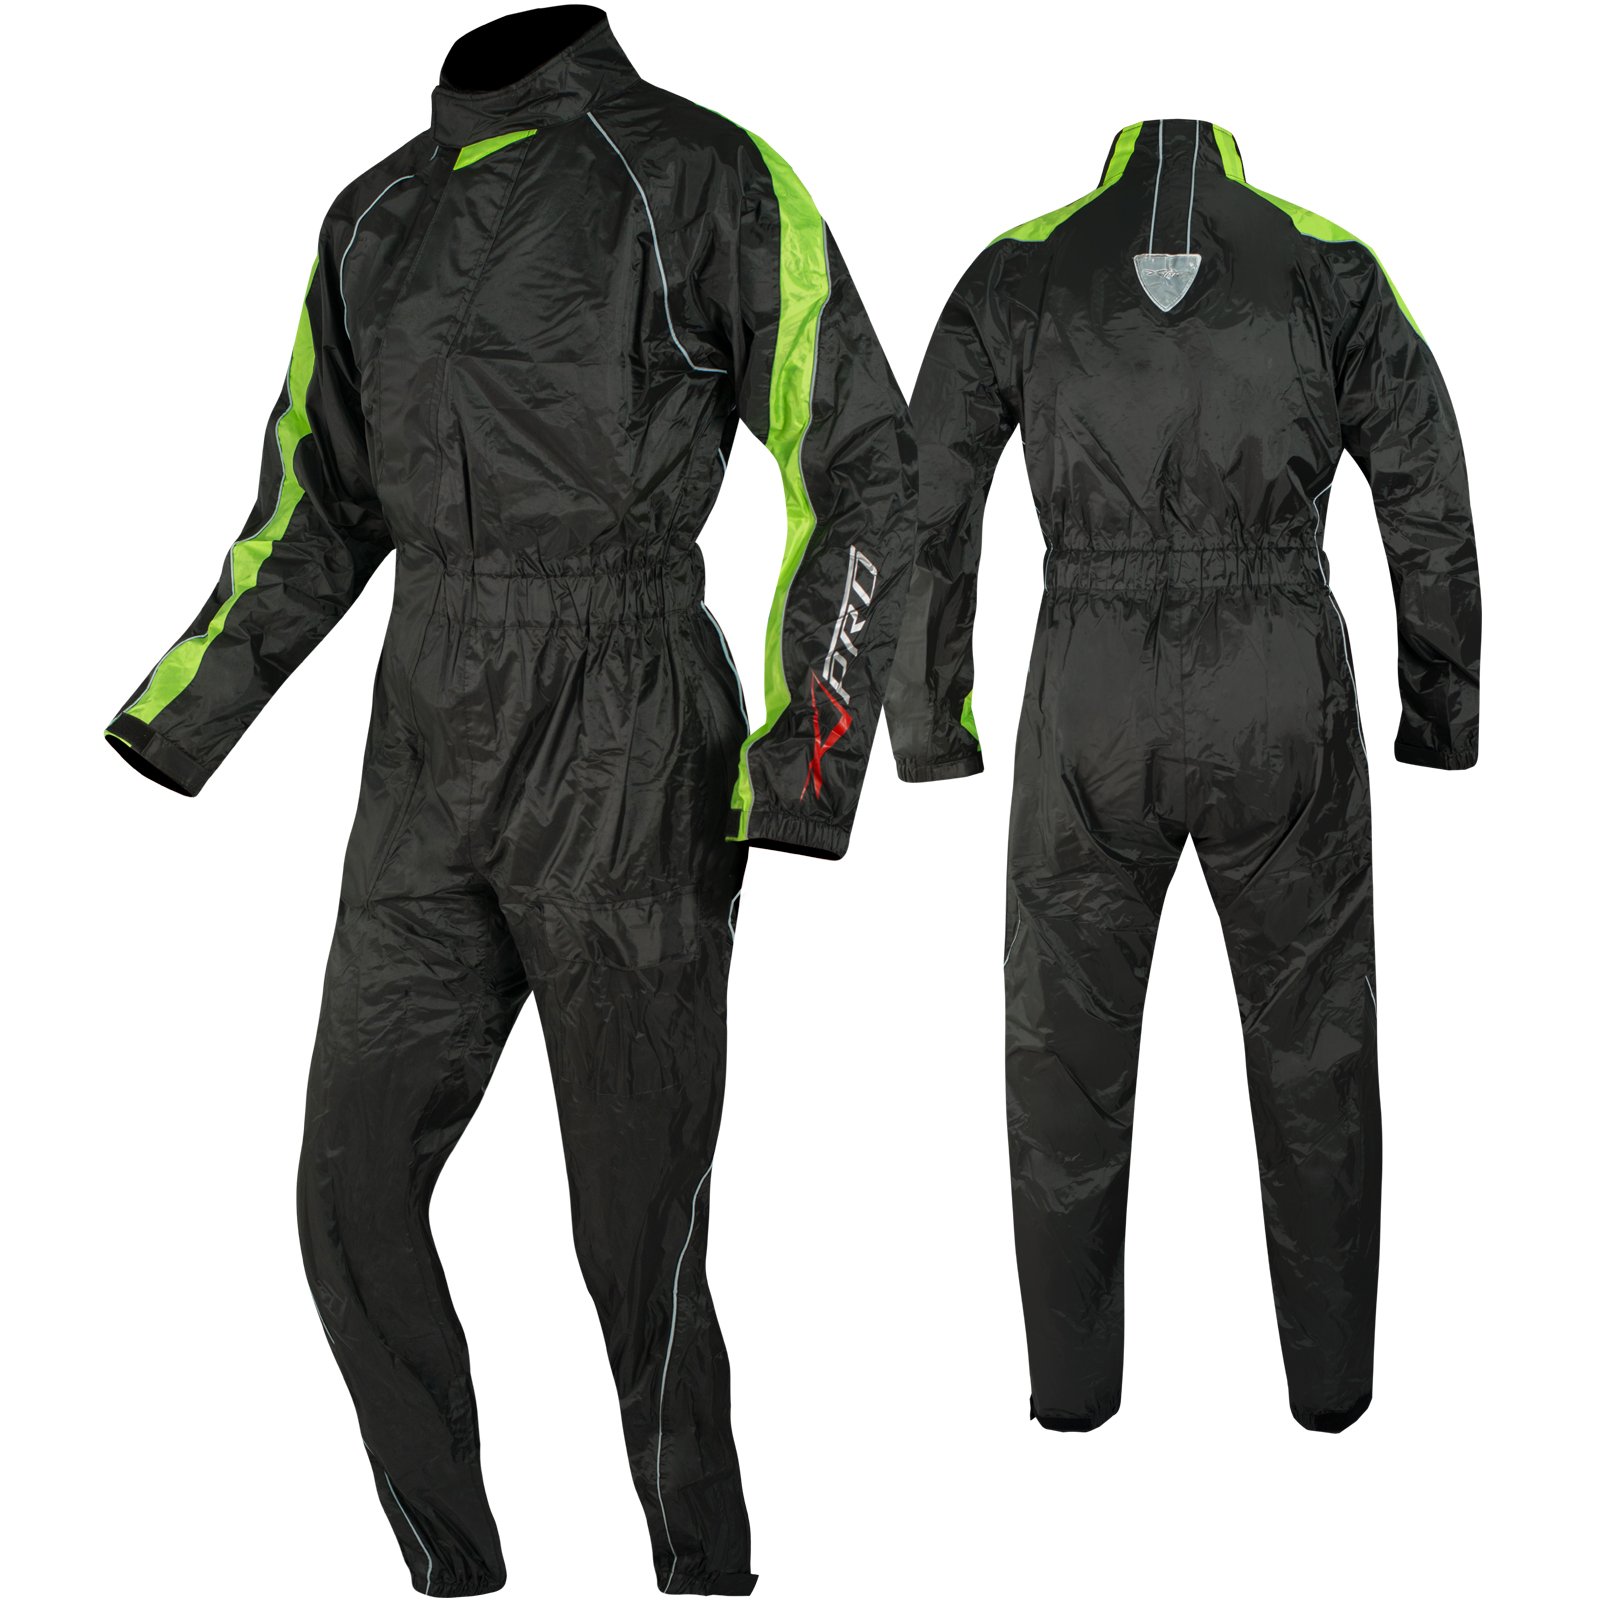 A-Pro Motorcycle Motorbike Scooter 1 pc Waterproof Body Over Rain Suit Fluo S von A-Pro